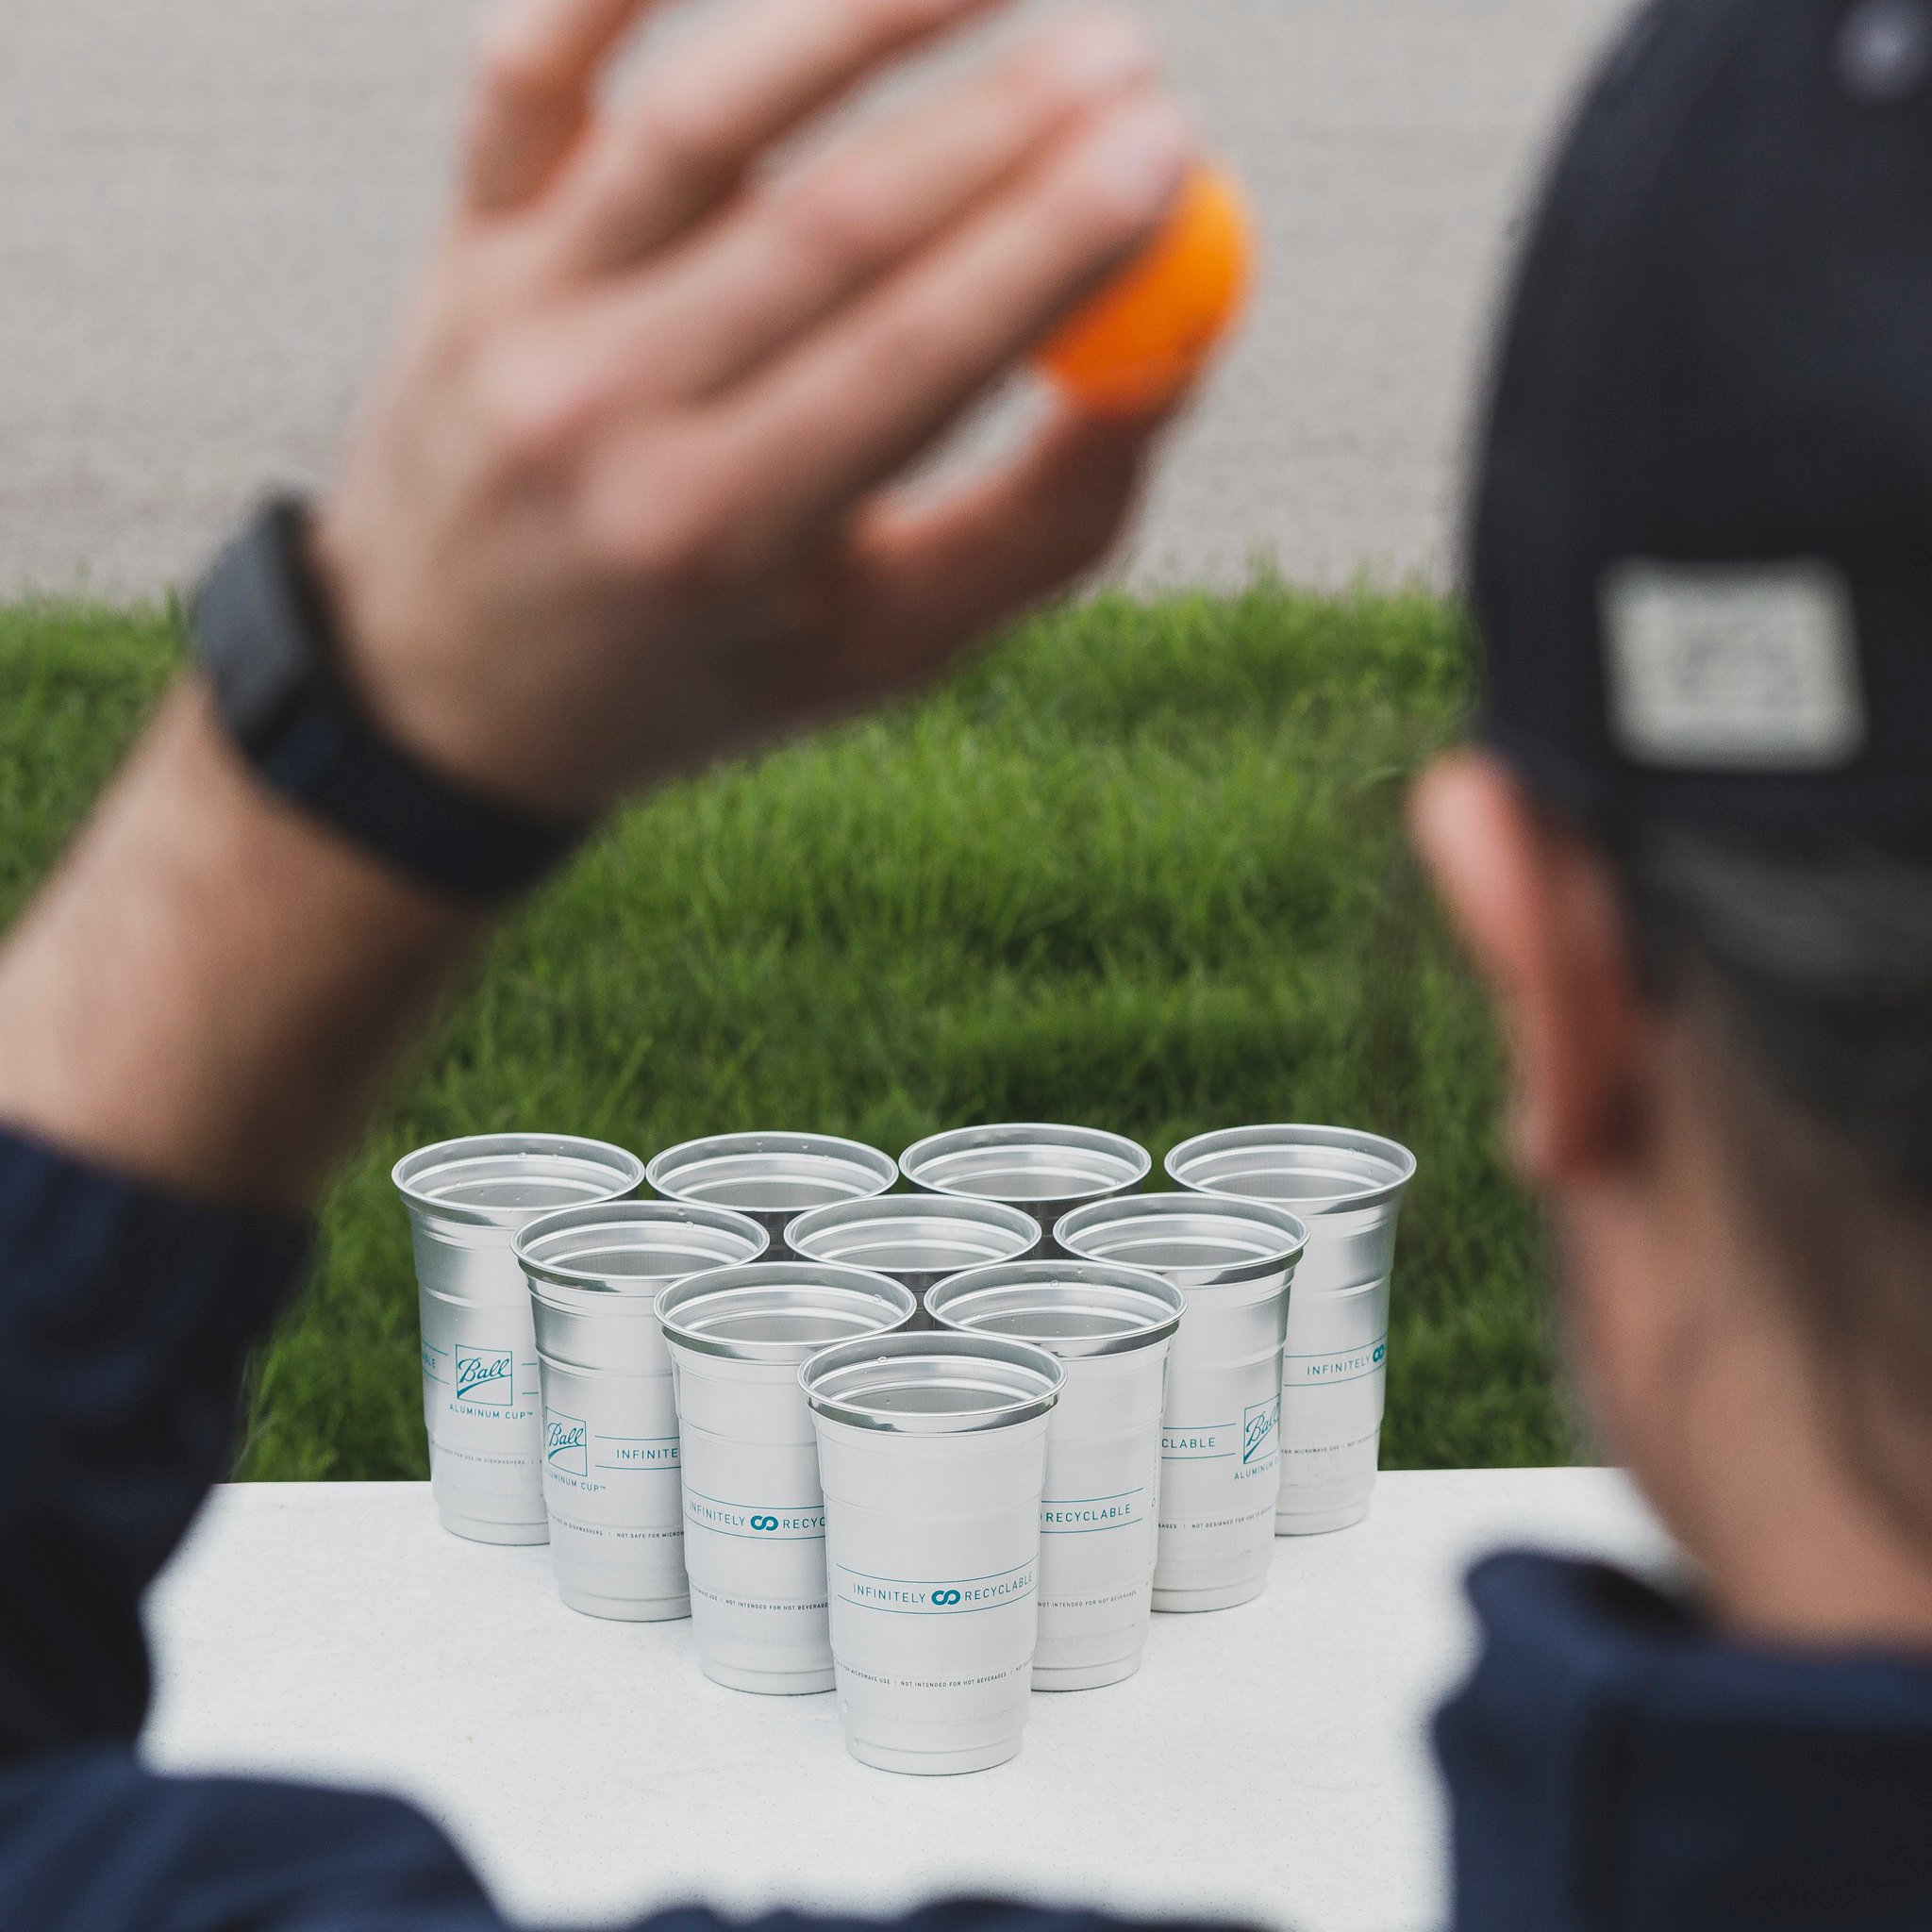 kegworks-how-to-play-beer-pong-2